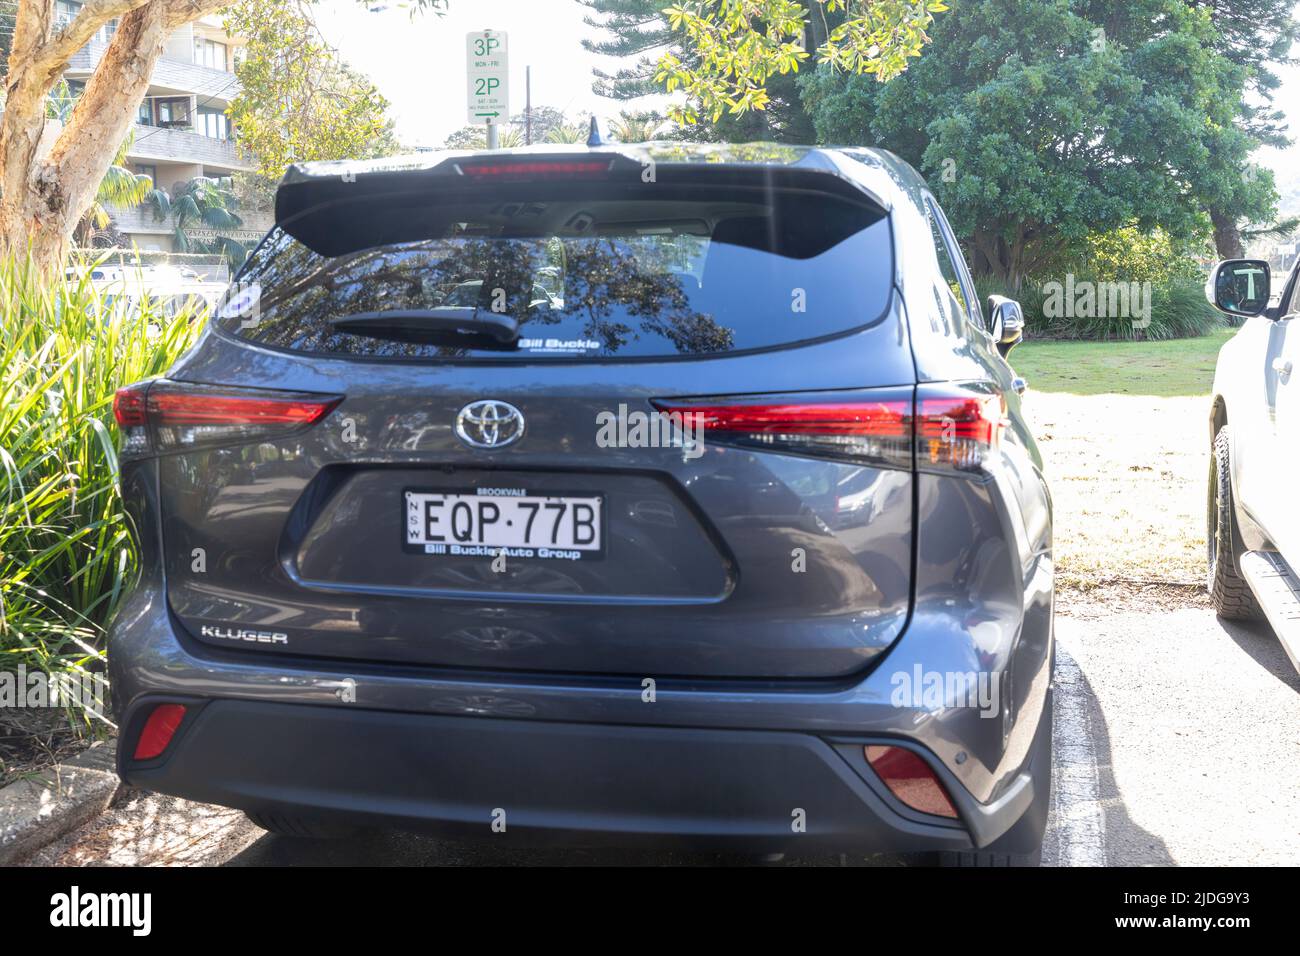 2021 model Toyota Kluger SUV vehicle parked in Avalon Beach Sydney, picture of rear of vehicle,Australian car Stock Photo